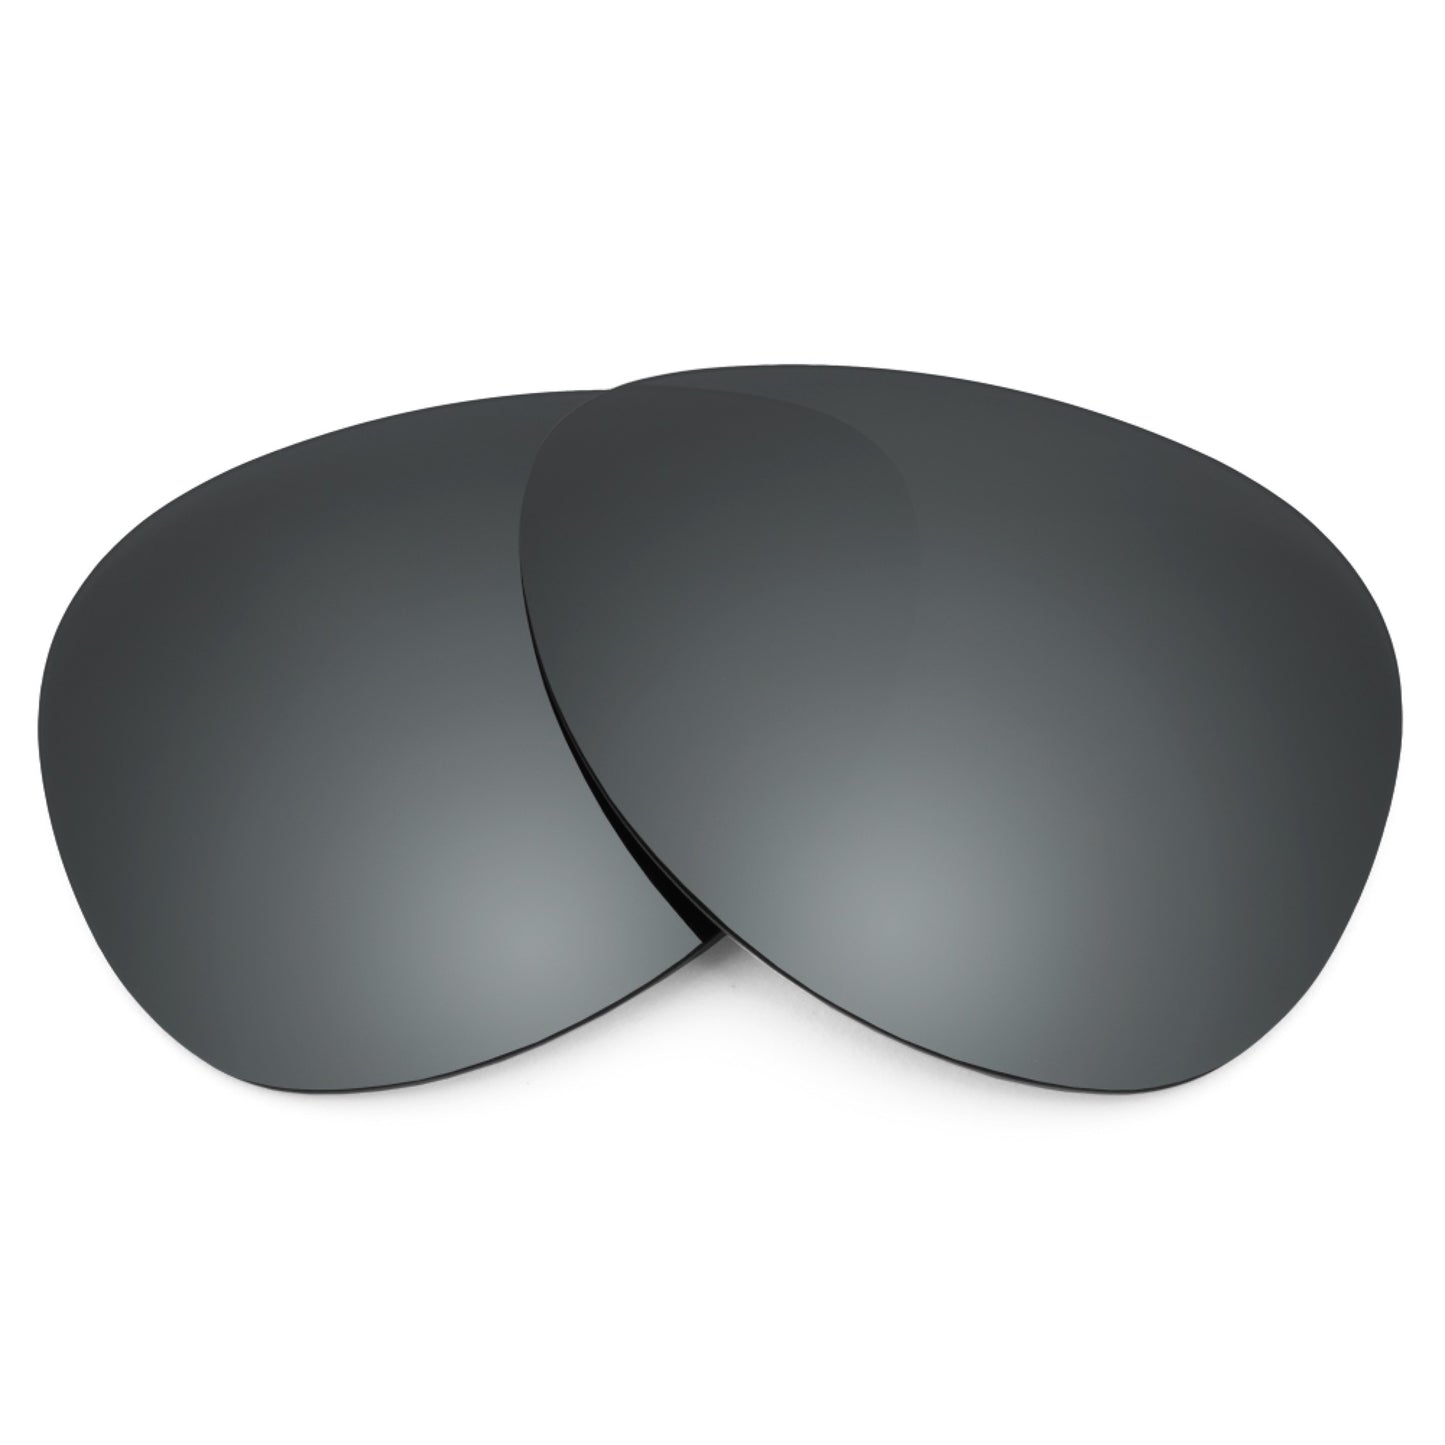 Revant replacement lenses for Ray-Ban Cats 5000 RB4125 59mm Polarized Black Chrome